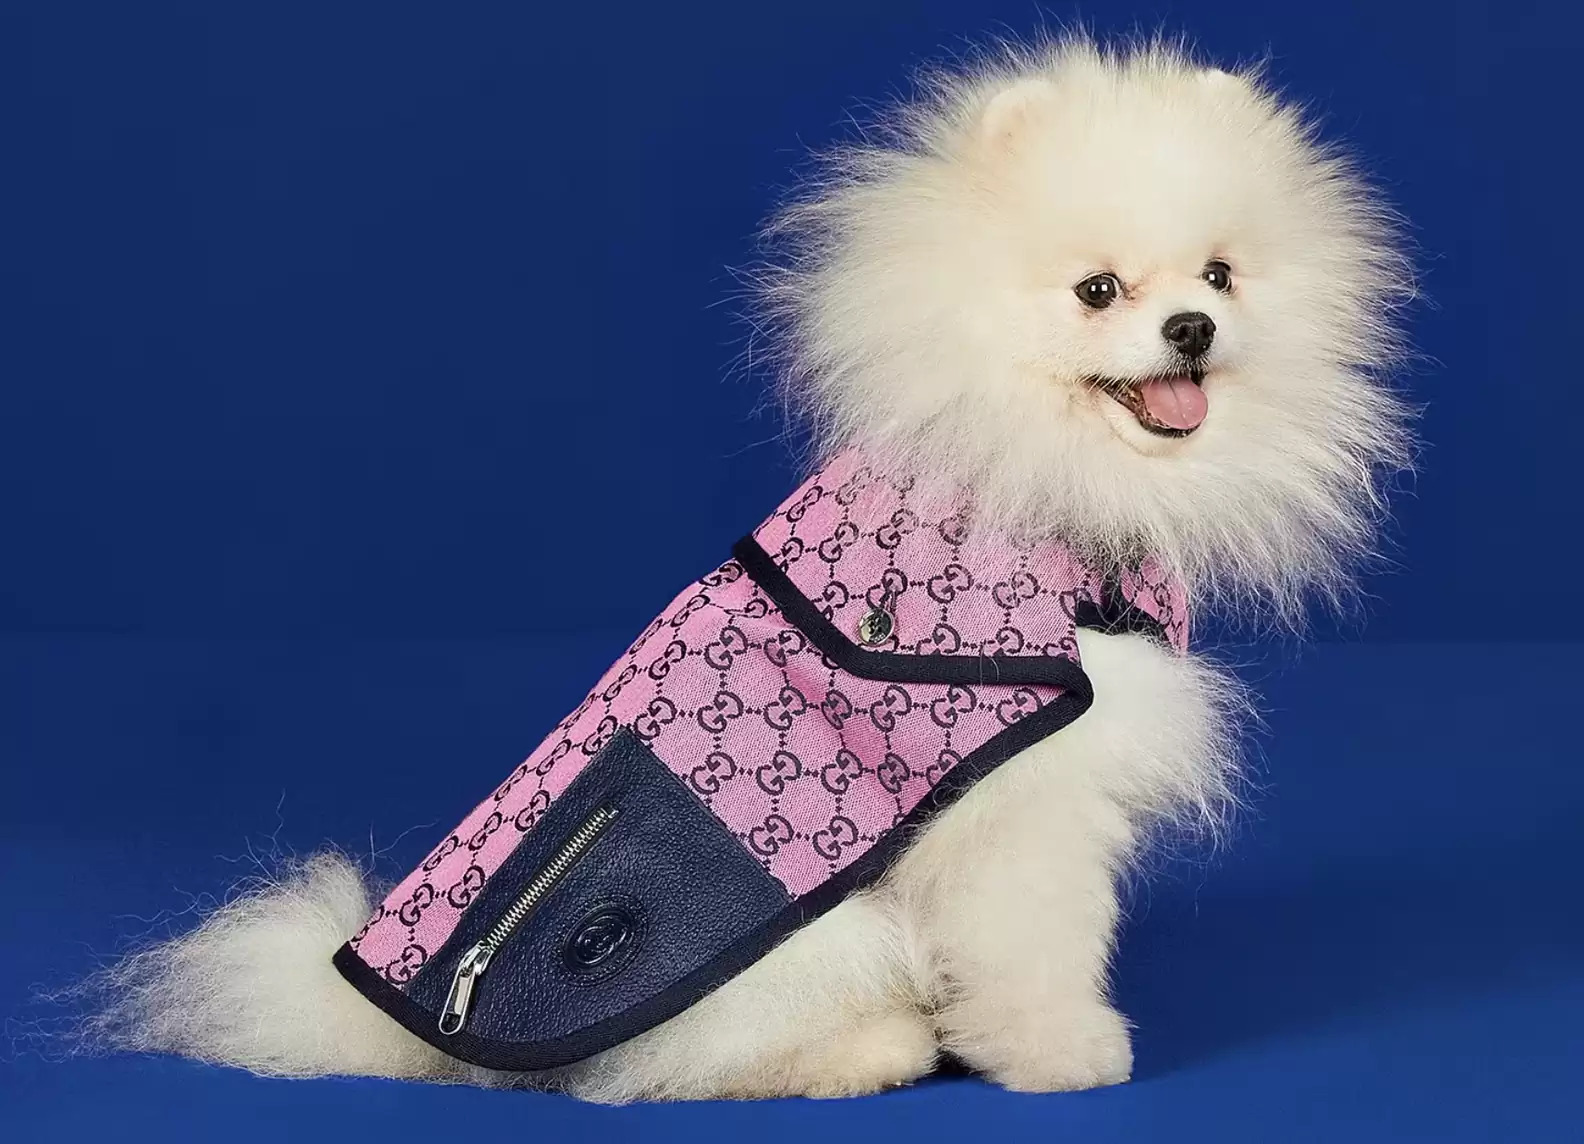 pamper your furry friends with the new gucci pet collection